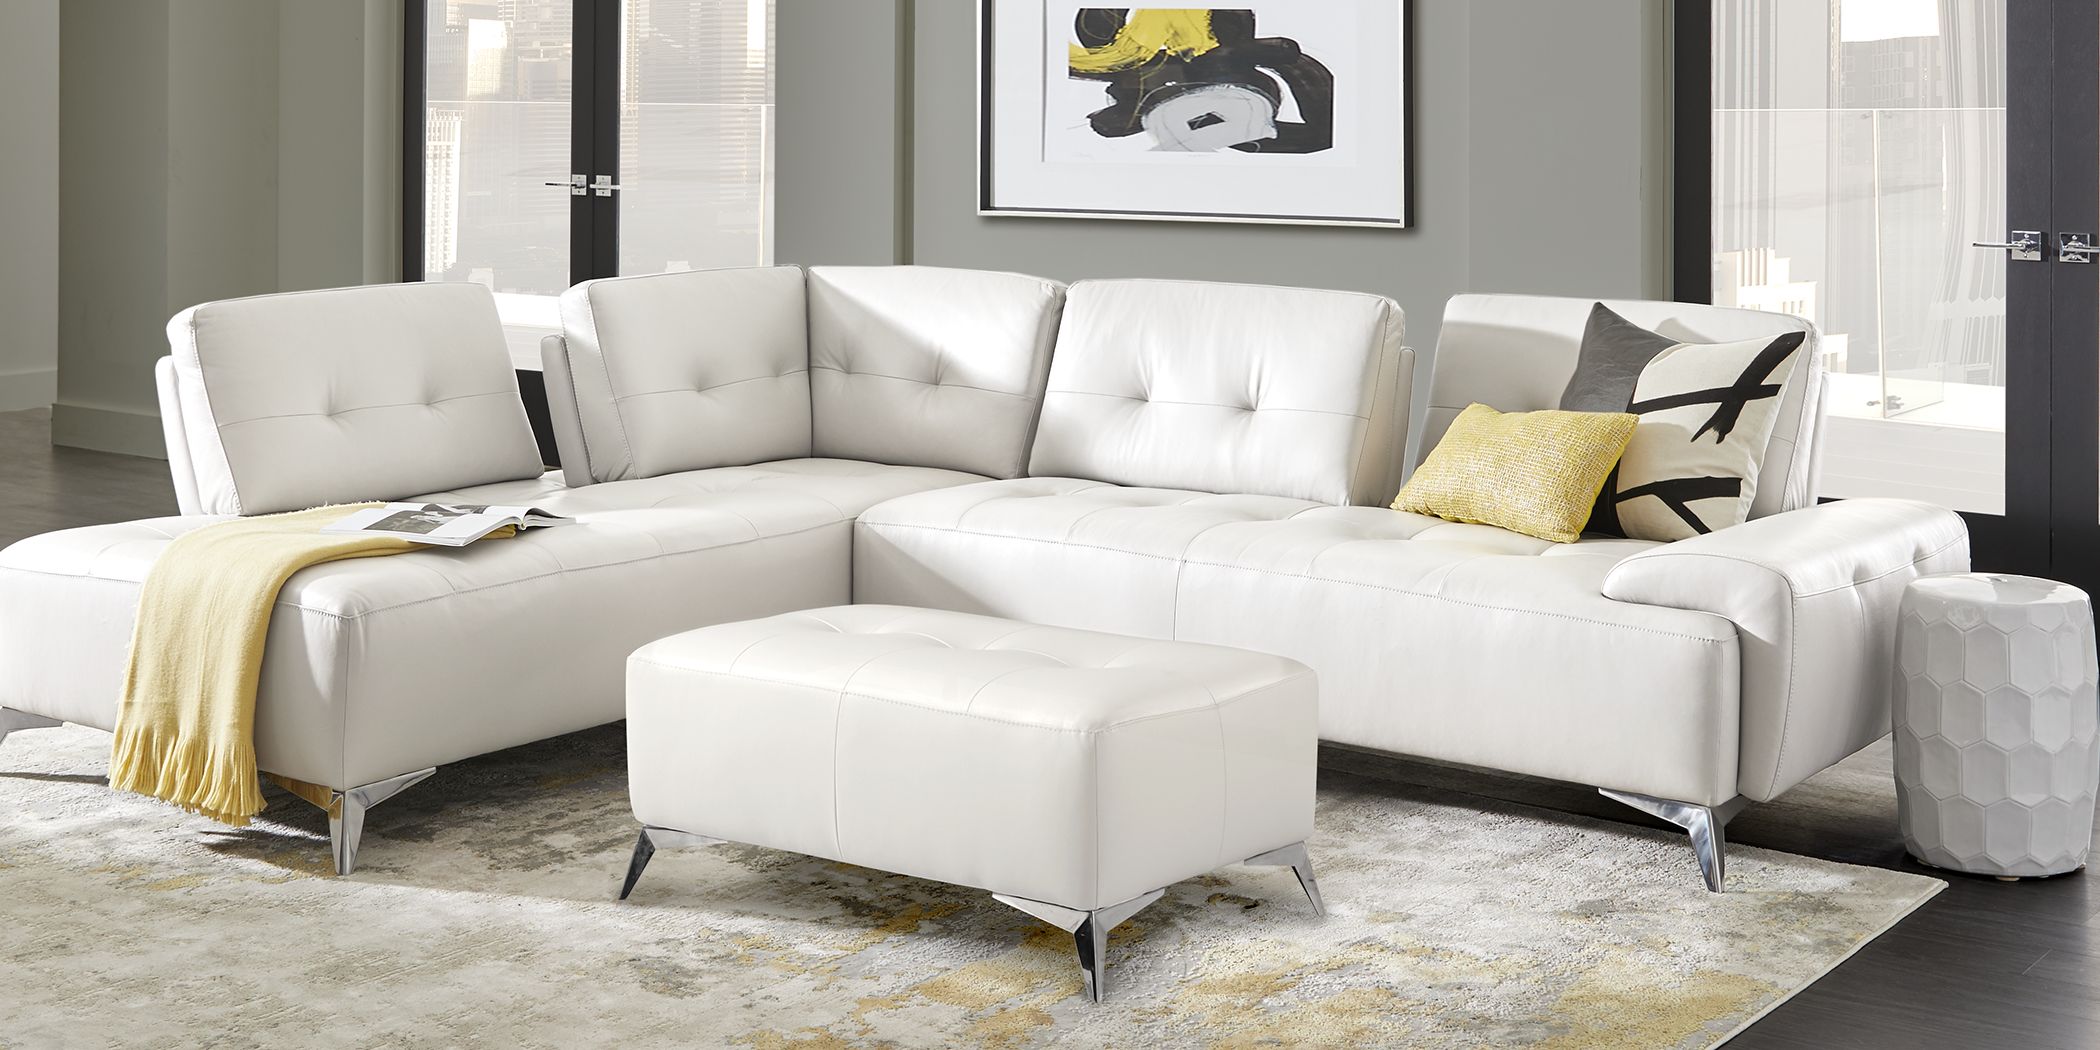 White Leather Living Room Sets With Rhinestones